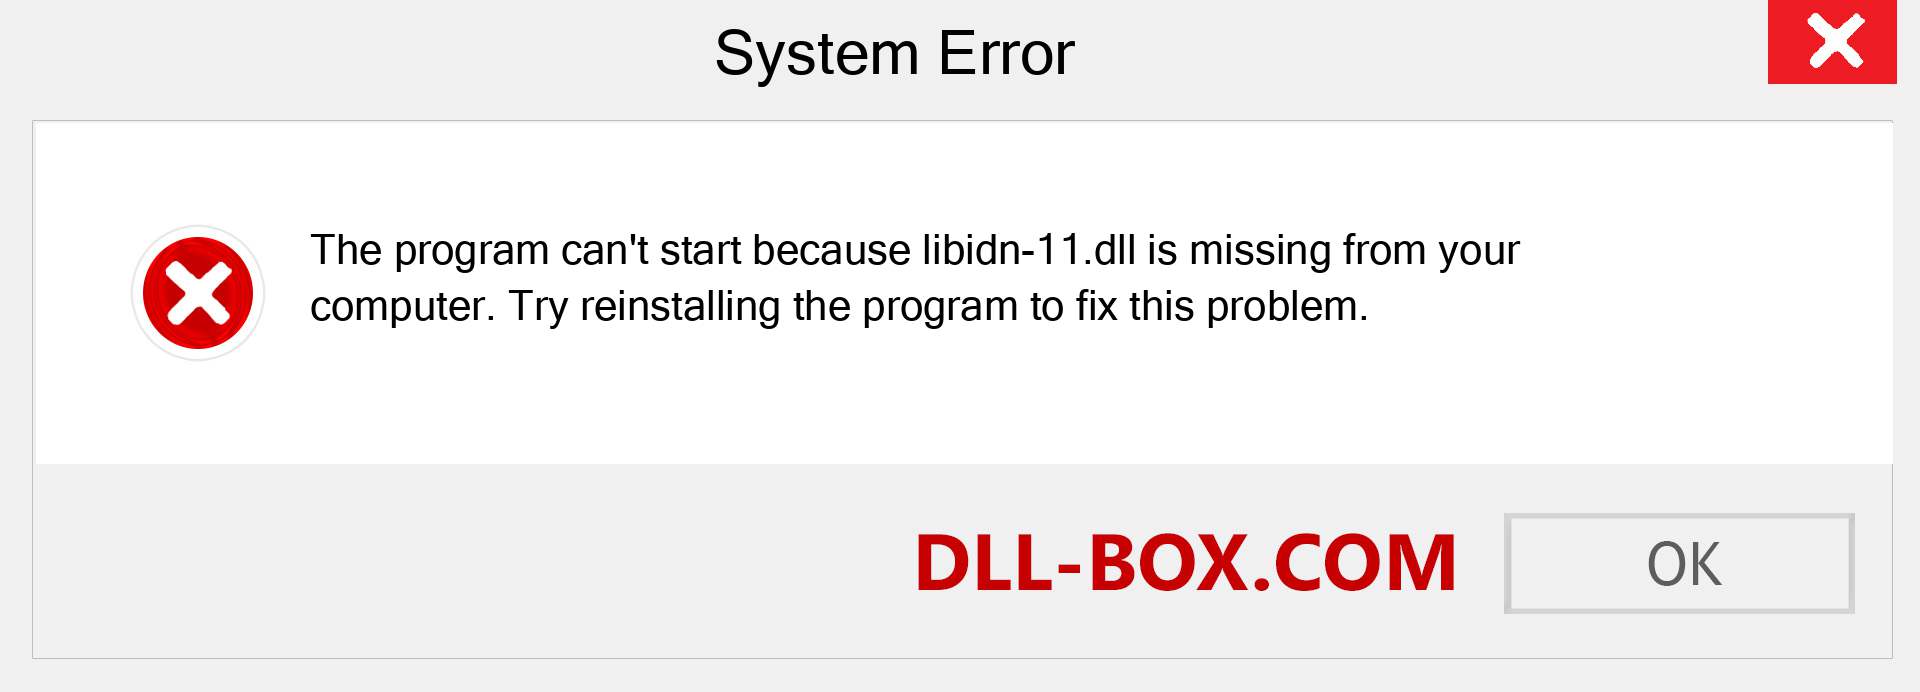  libidn-11.dll file is missing?. Download for Windows 7, 8, 10 - Fix  libidn-11 dll Missing Error on Windows, photos, images